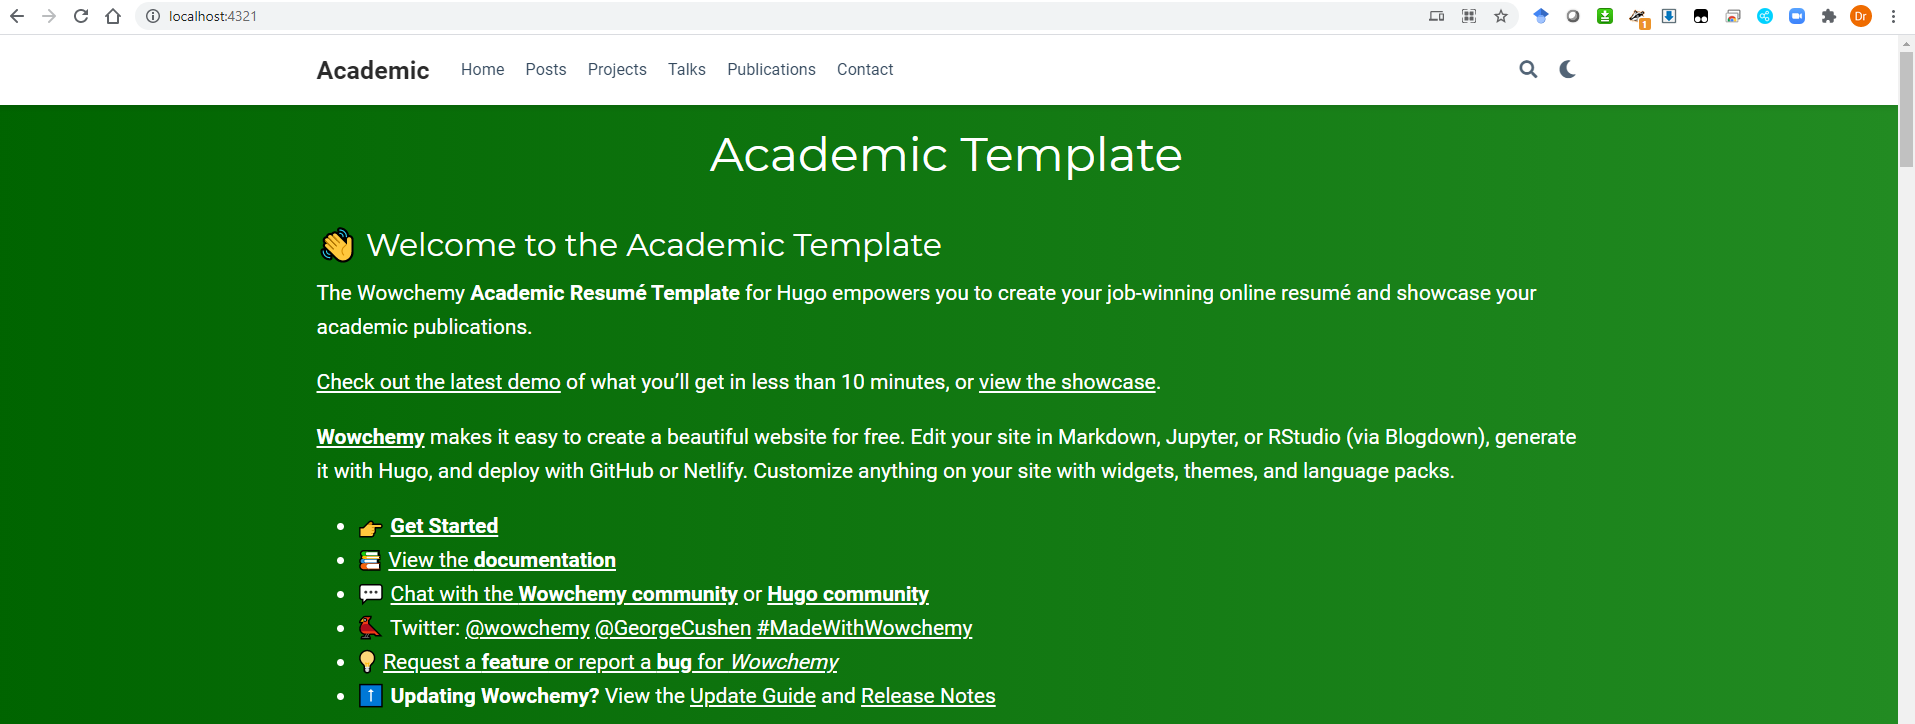 Academic Template Local